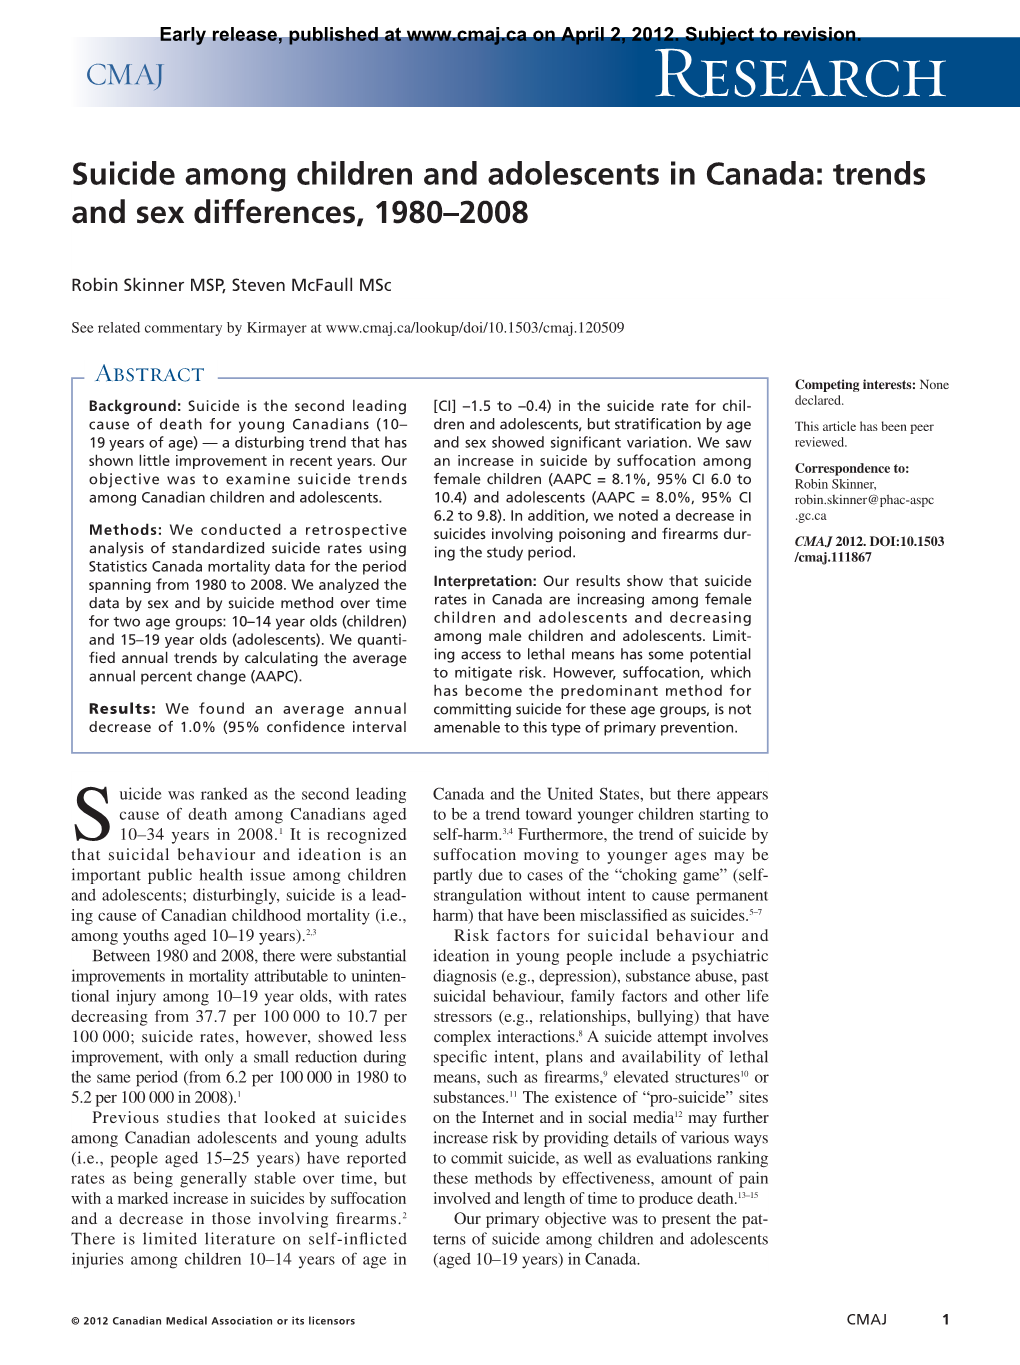 Suicide Among Children and Adolescents in Canada: Trends and Sex Differences, 1980–2008